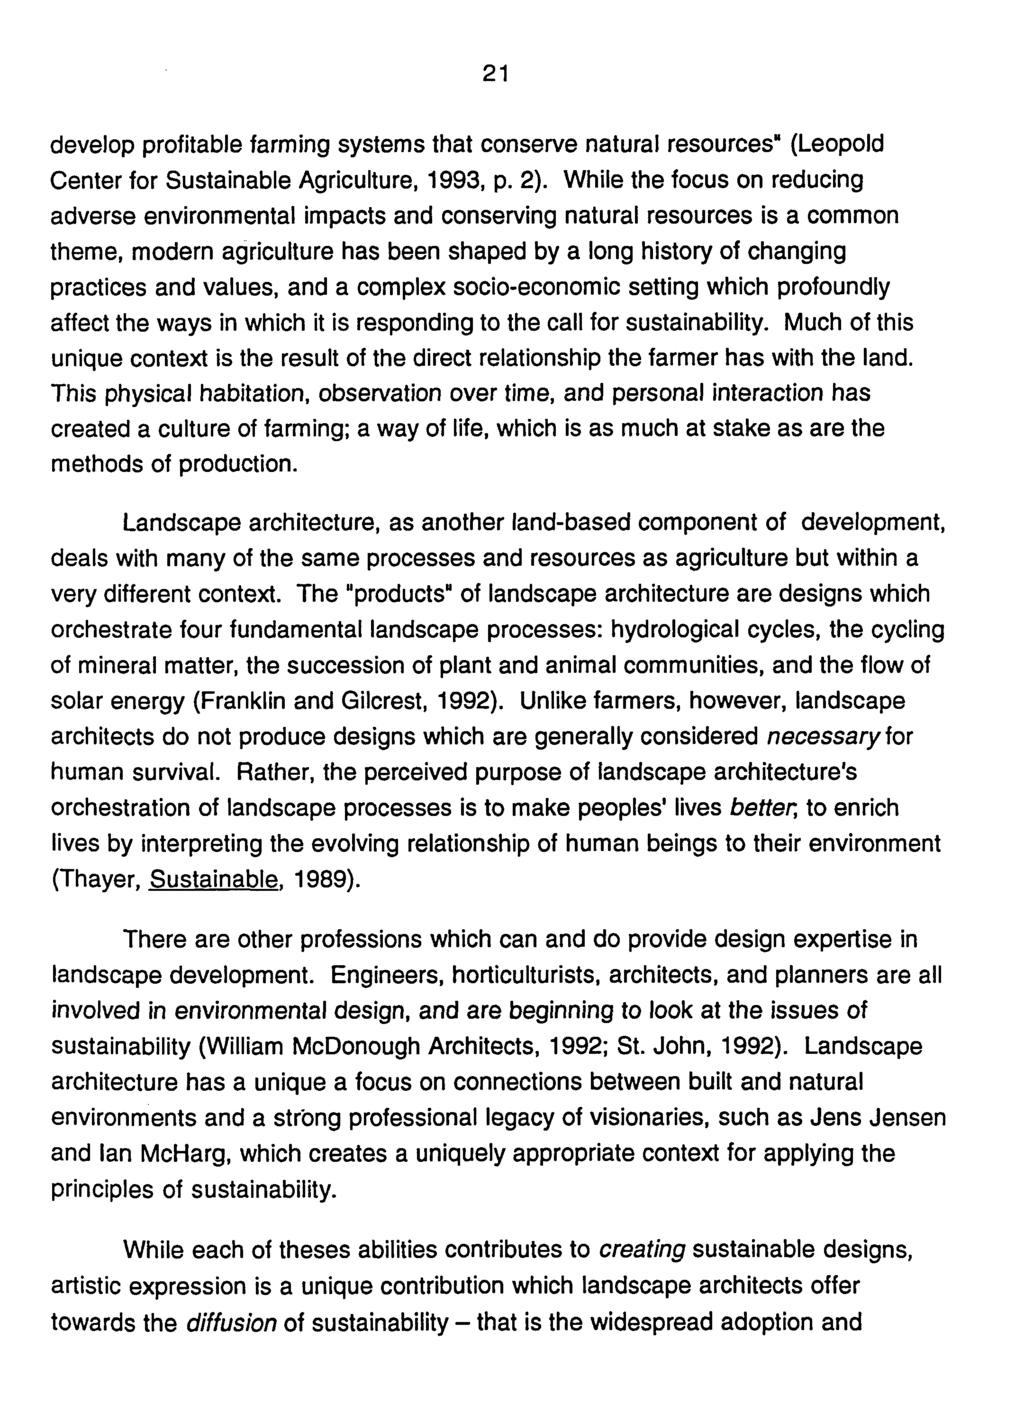 21 develop profitable farming systems that conserve natural resources" (Leopold Center for Sustainable Agriculture, 1993, p. 2).